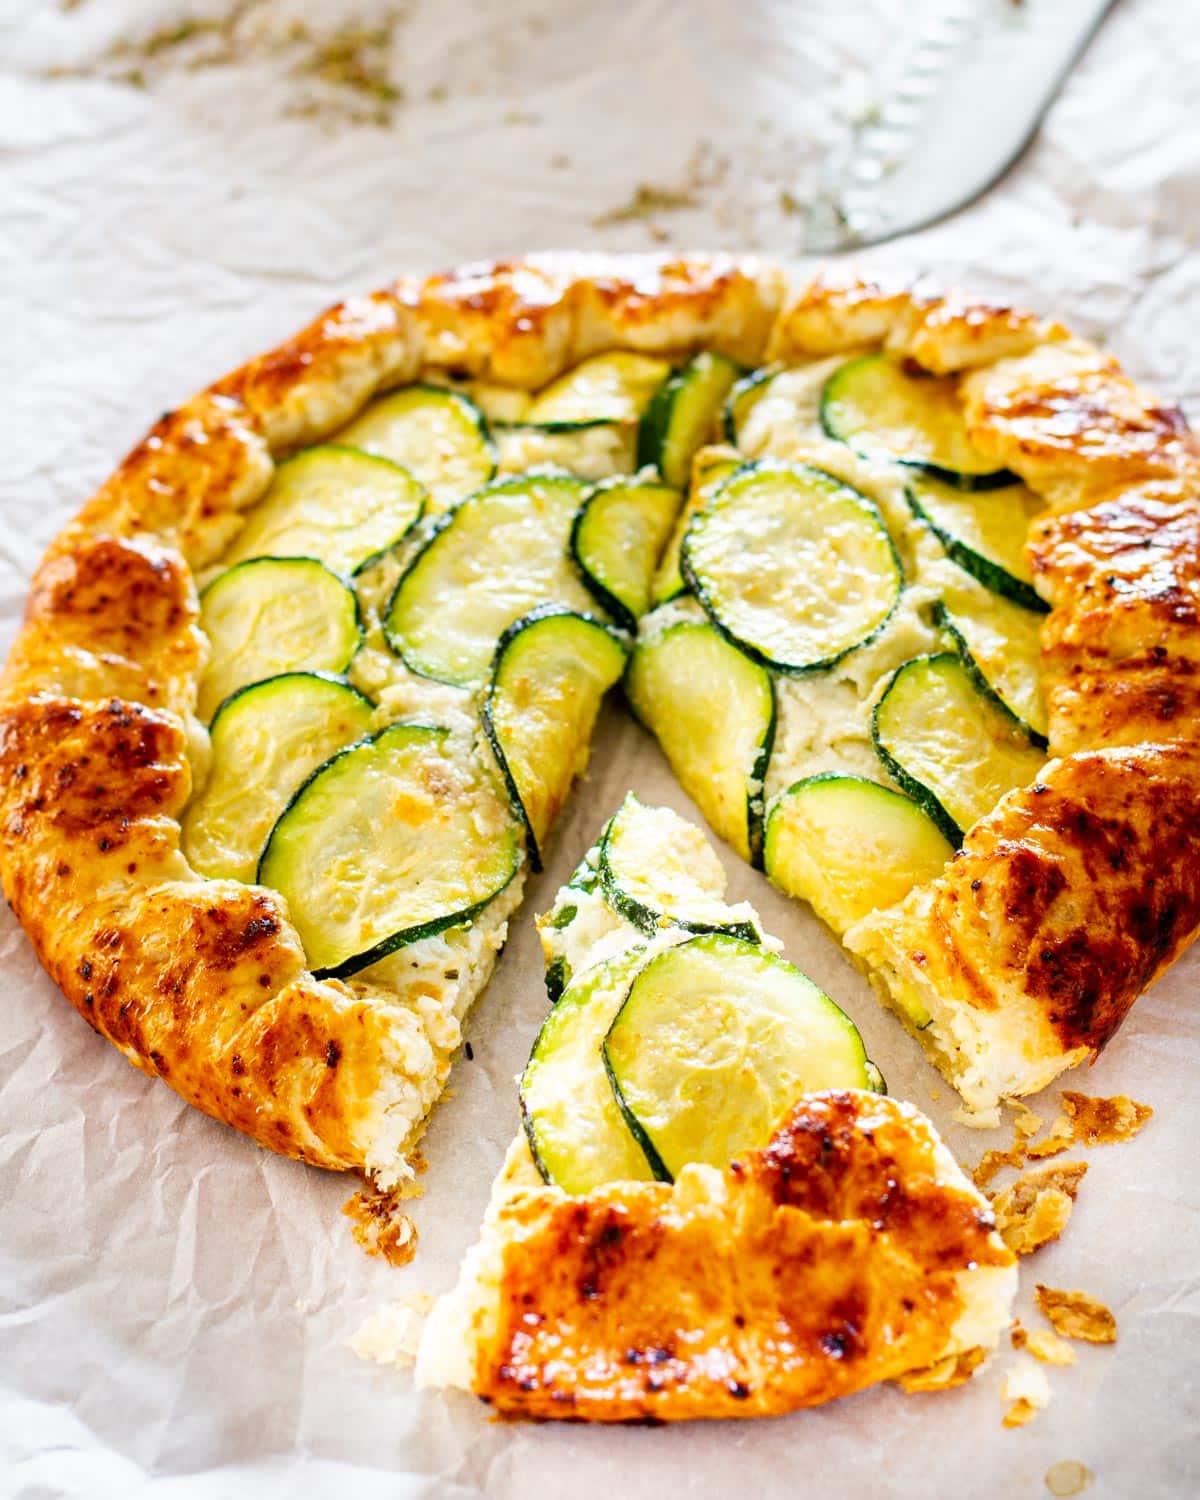 side view shot of a zucchini ricotta galette on a baking sheet lined with parchment paper fresh out of the oven with a slice cut out 